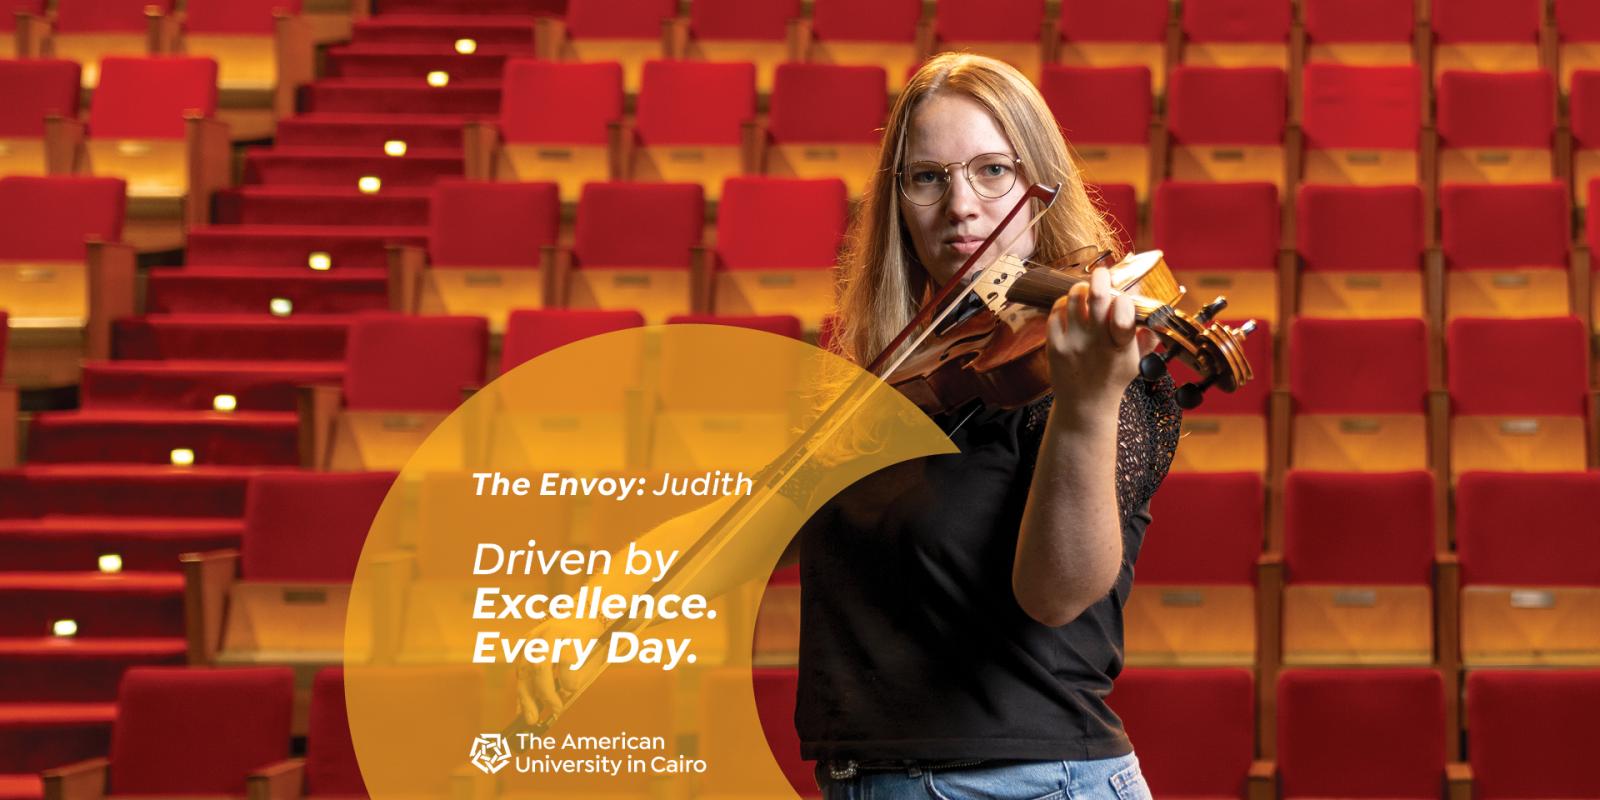 A female wearing glasses playing the violin in front of stage seats. Text reads "The Envoy: Judith. Driven by Excellence. Every Day. ϲͼ"